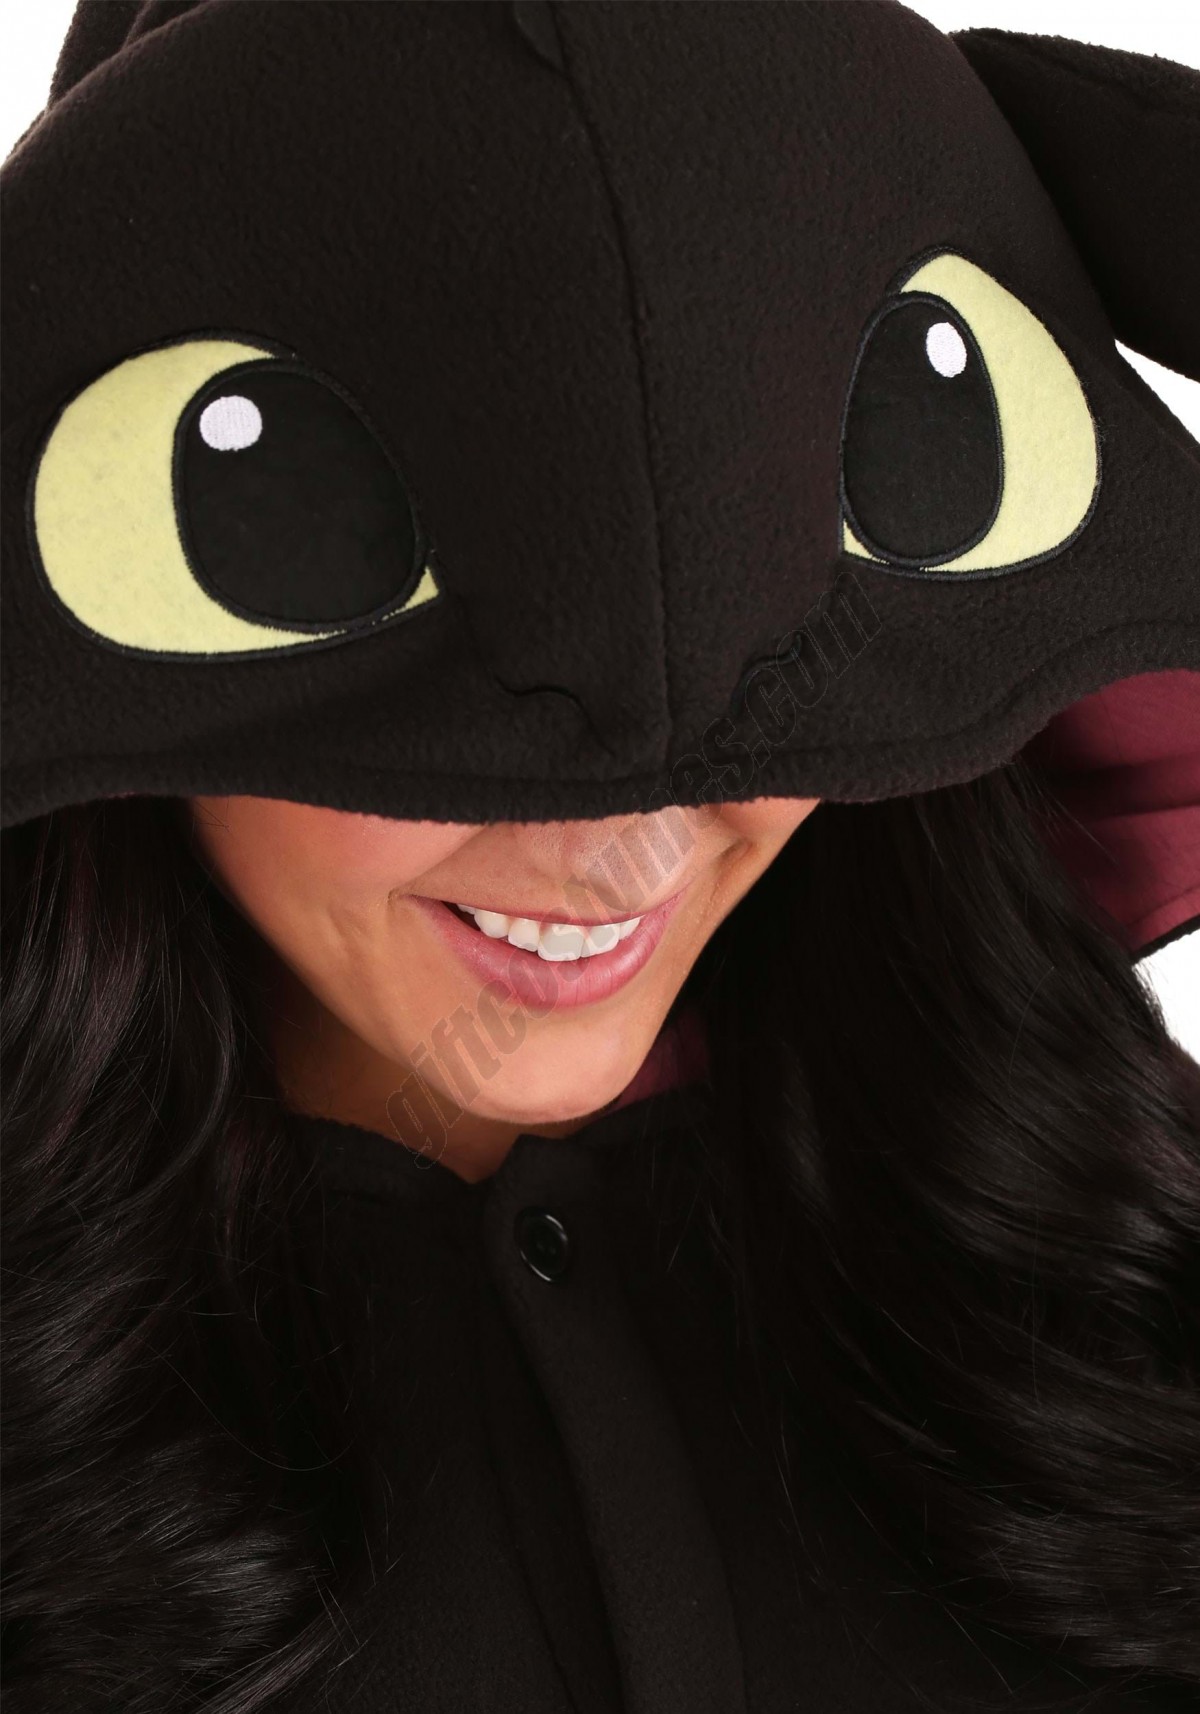 How to Train Your Dragon Toothless Adult Kigurumi Costume - Men's - -2